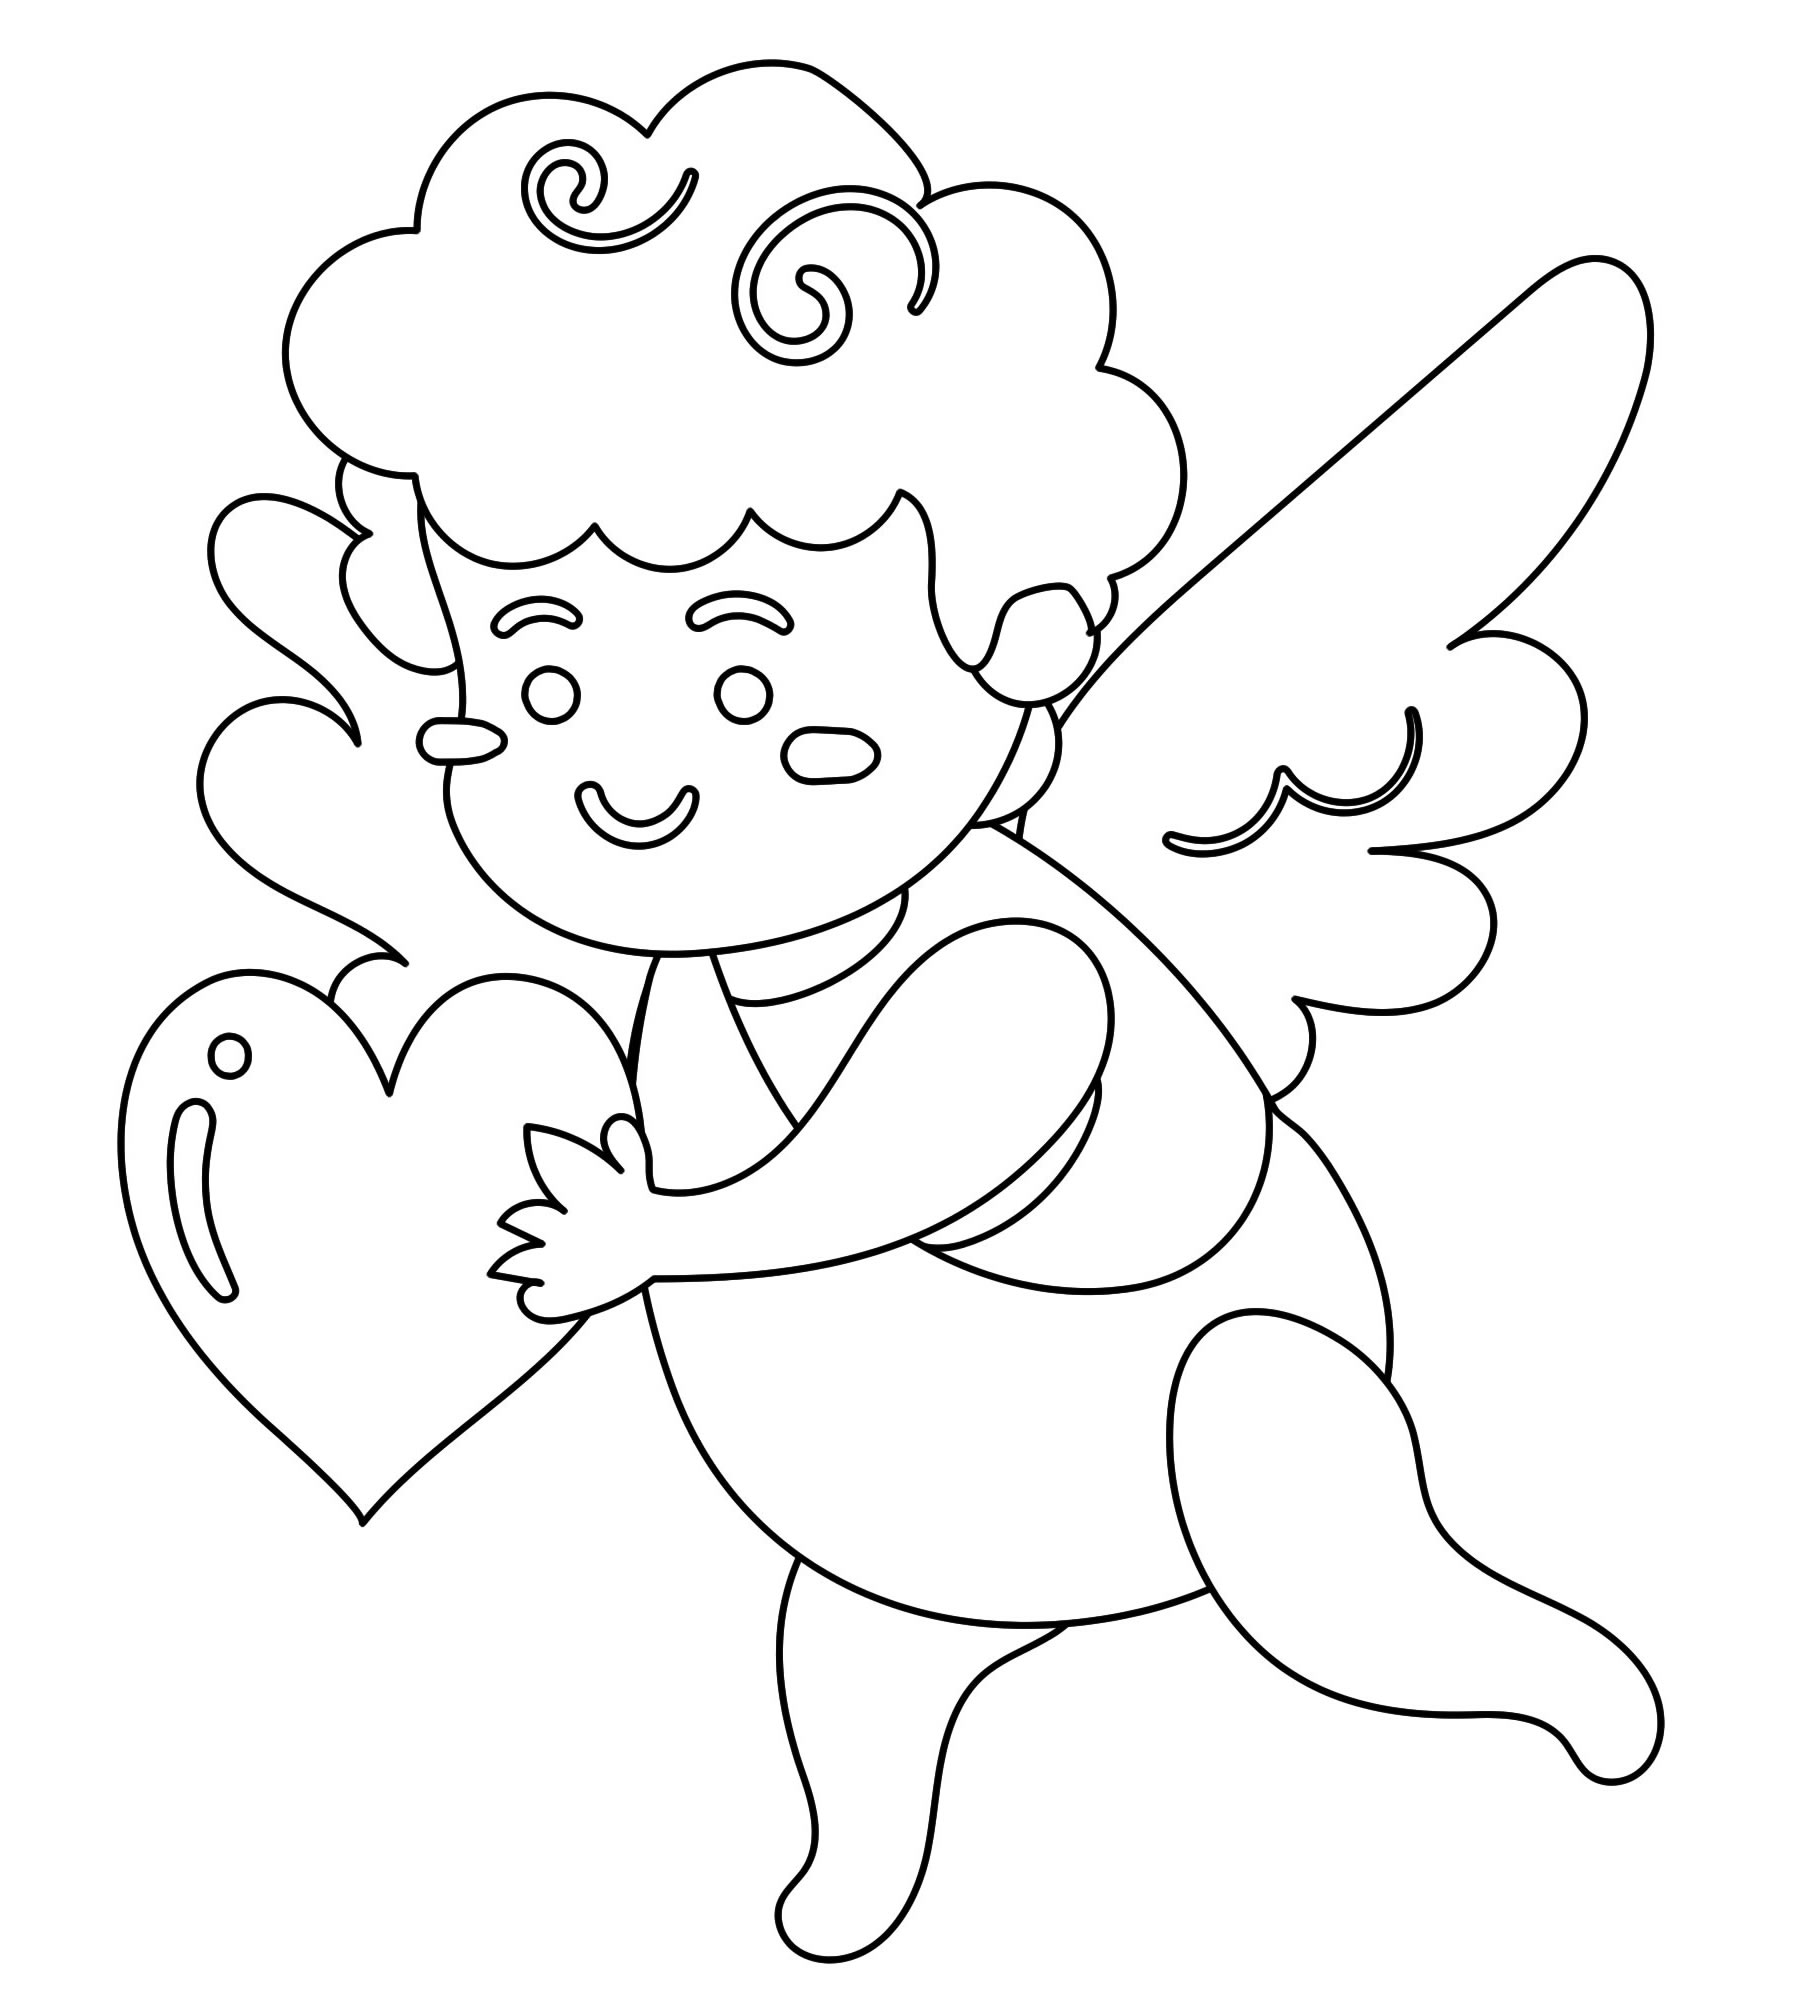 Coloring book calm Cupid with a heart